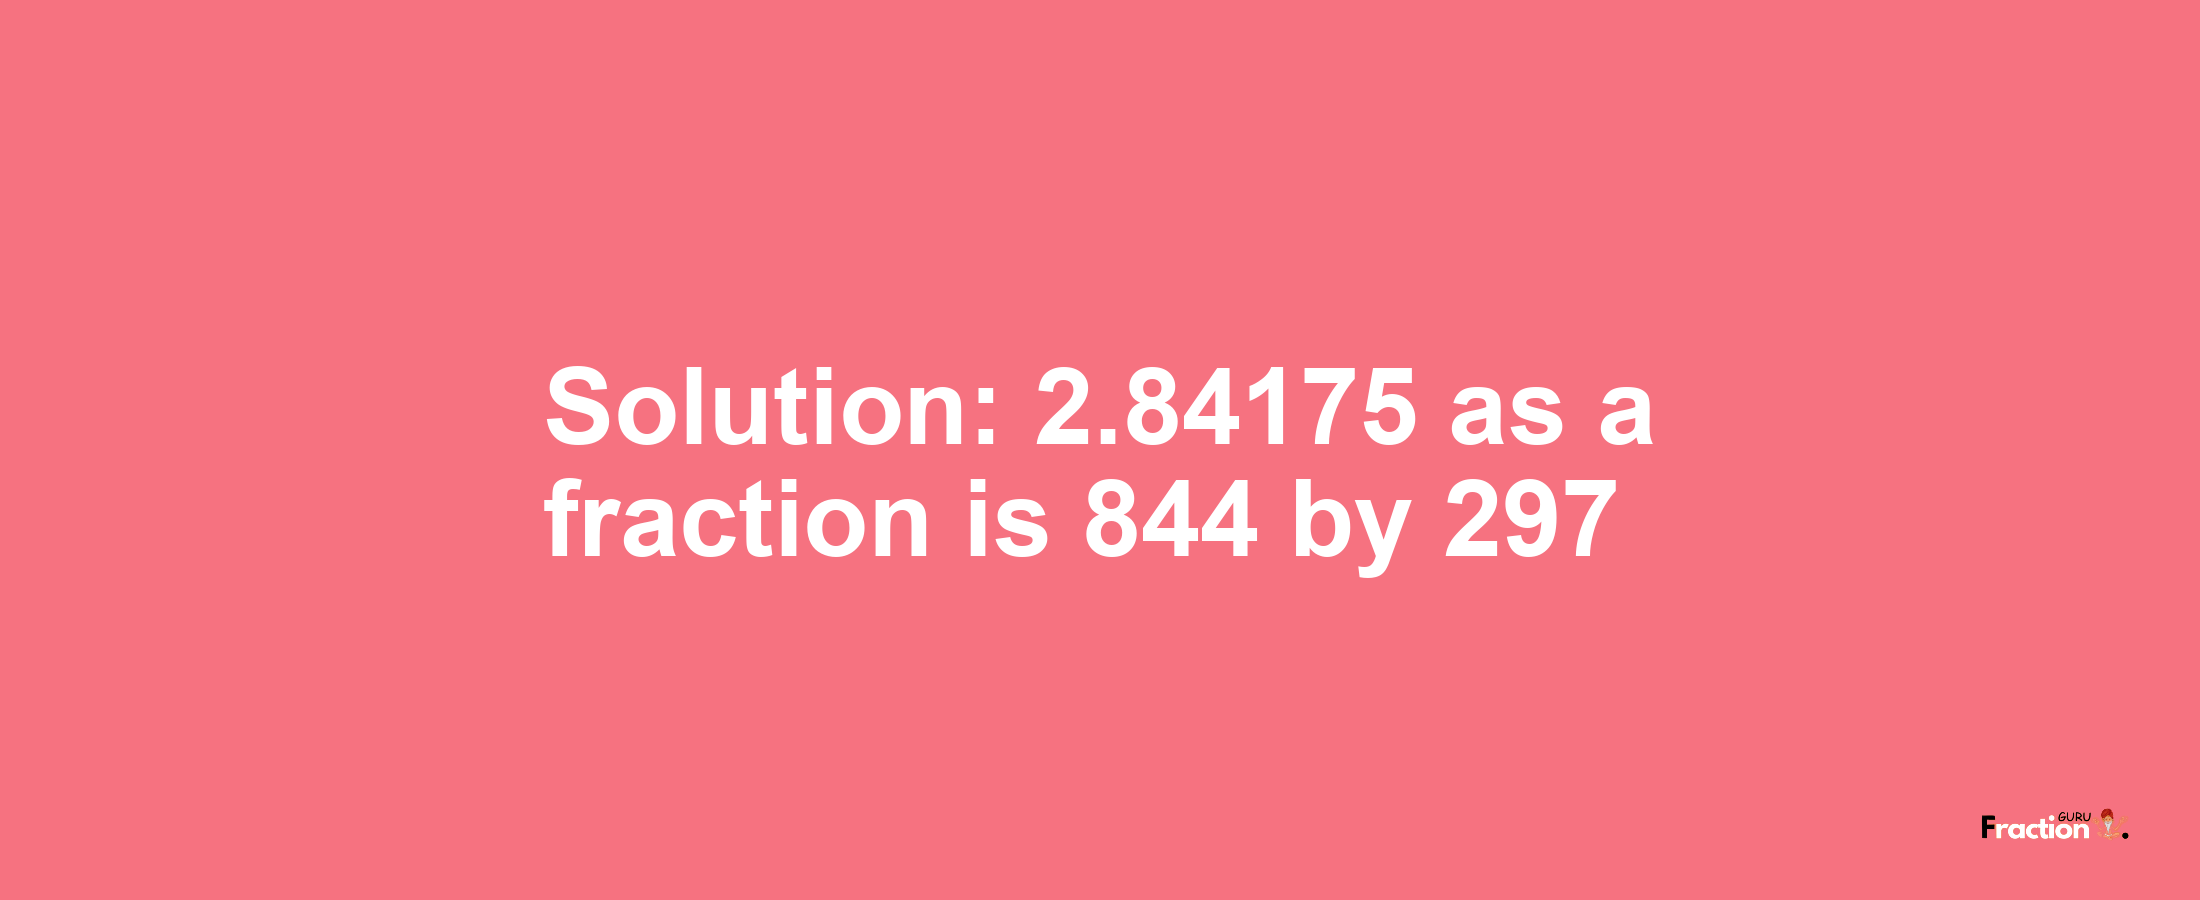 Solution:2.84175 as a fraction is 844/297